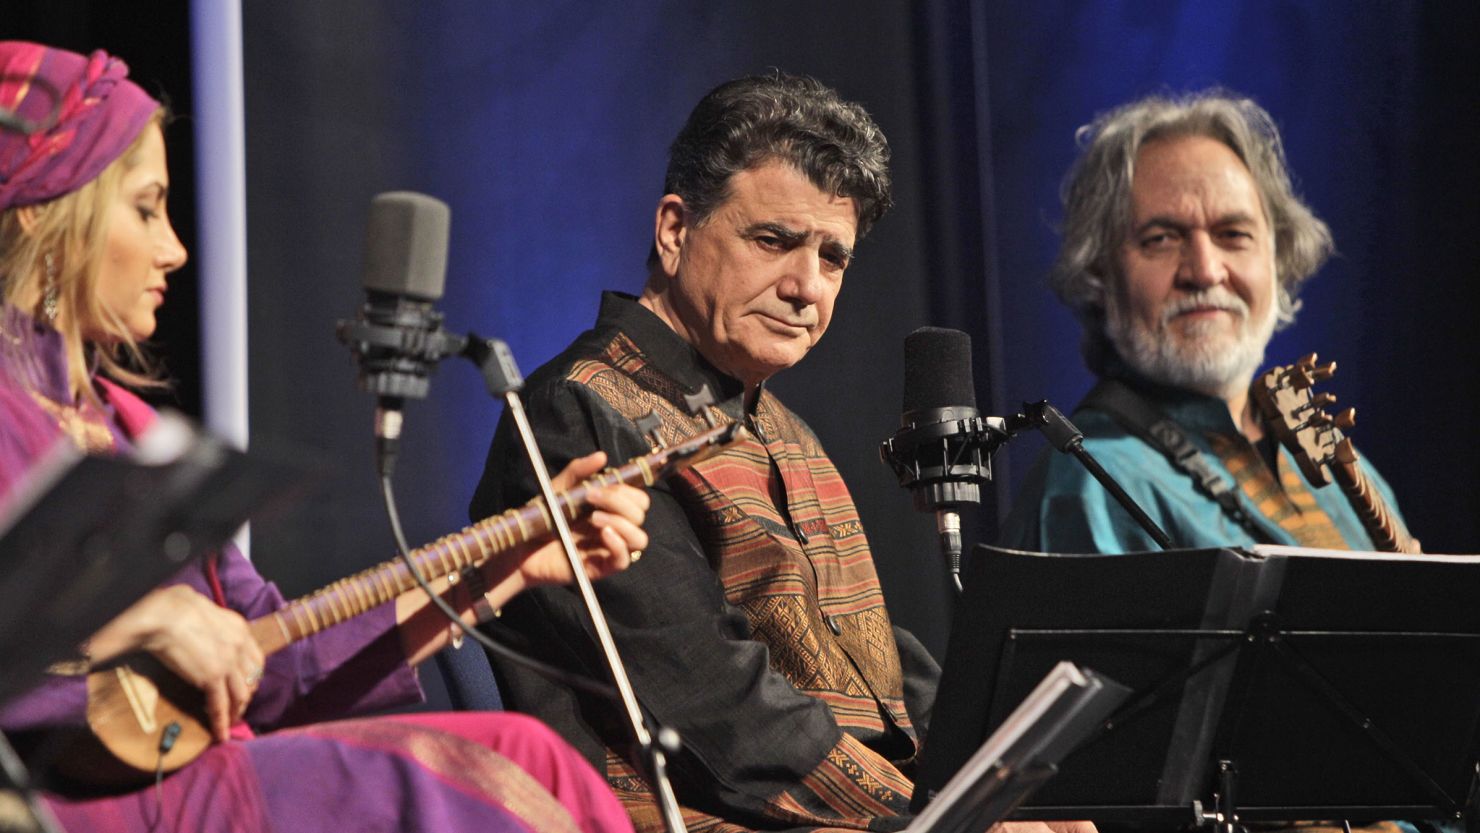 Iran's greatest master of Persian classical music Mohammad Reza Shajarian, middle, performs with Mojgan Shajarian, 2nd left, and Majid Derakhshani composer, 2nd right, during a concert with Shahnaz Ensemble band in Dubai, United Arab Emirates, Thursday, Feb. 17, 2011. 